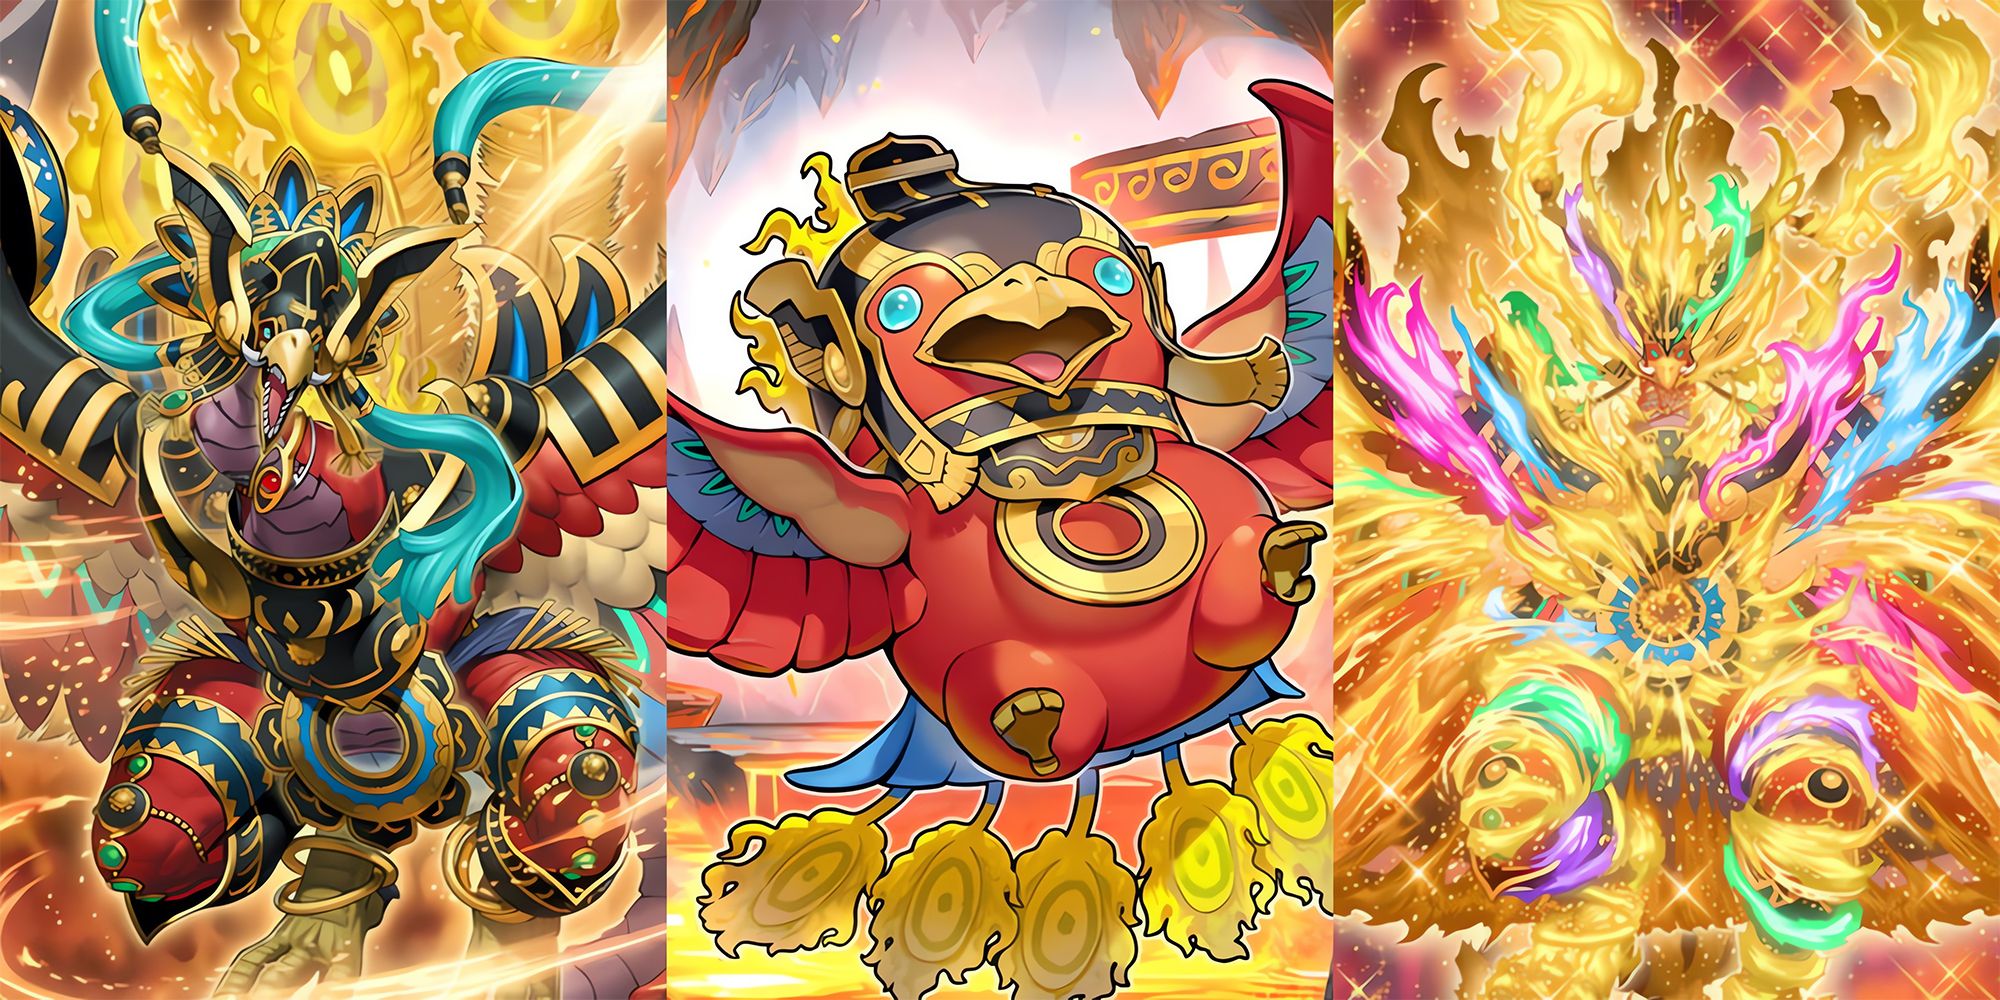 A collage showing the artwork of Sacred Fire King Garunix, Legendary Fire King Ponix, and Garunix Eternity, Hyang of the Fire Kings from the Yu-Gi-Oh TCG